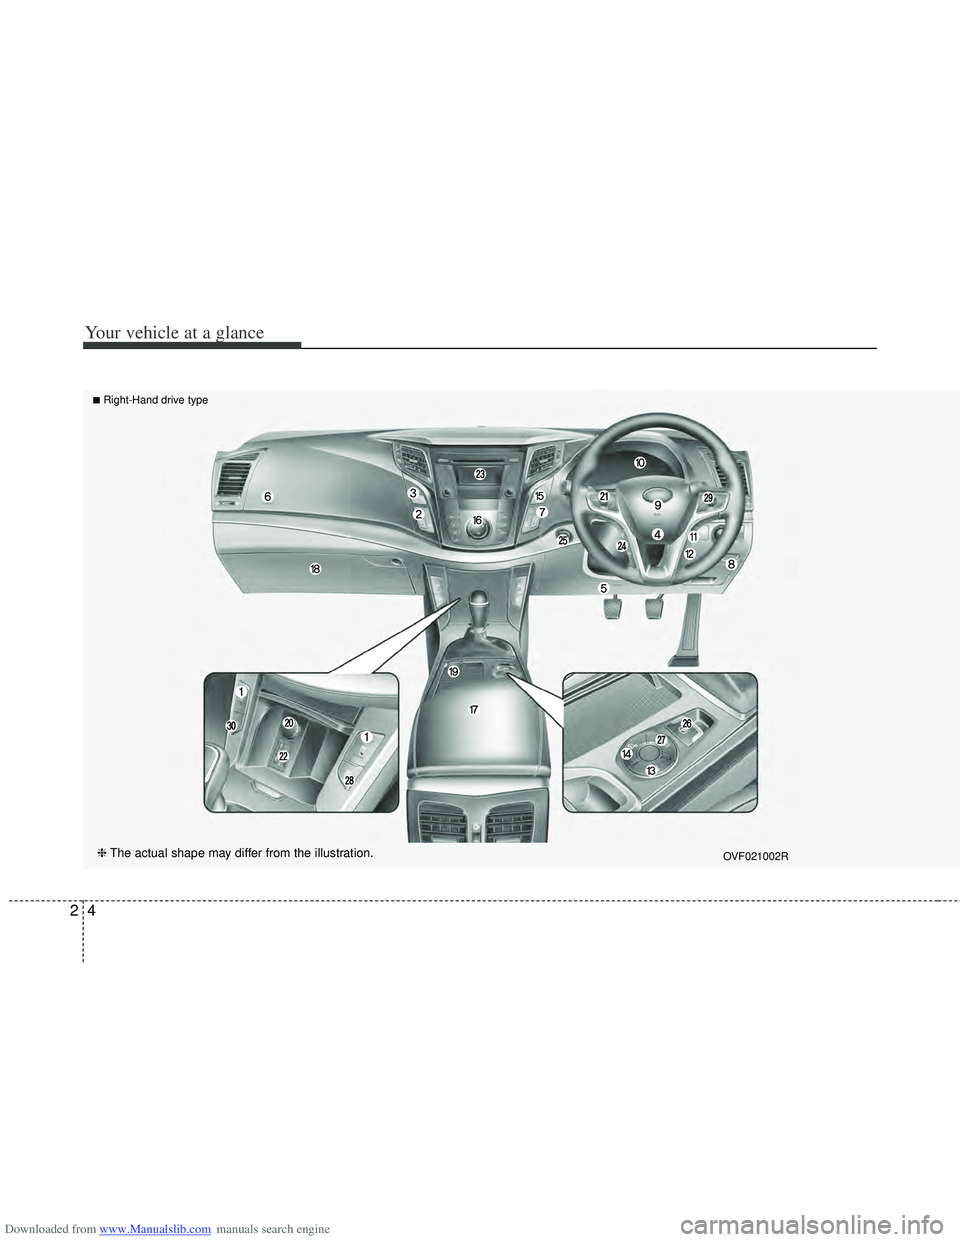 HYUNDAI I40 2018 User Guide Downloaded from www.Manualslib.com manuals search engine Your vehicle at a glance
42
❈The actual shape may differ from the illustration.OVF021002R
■Right-Hand drive type  